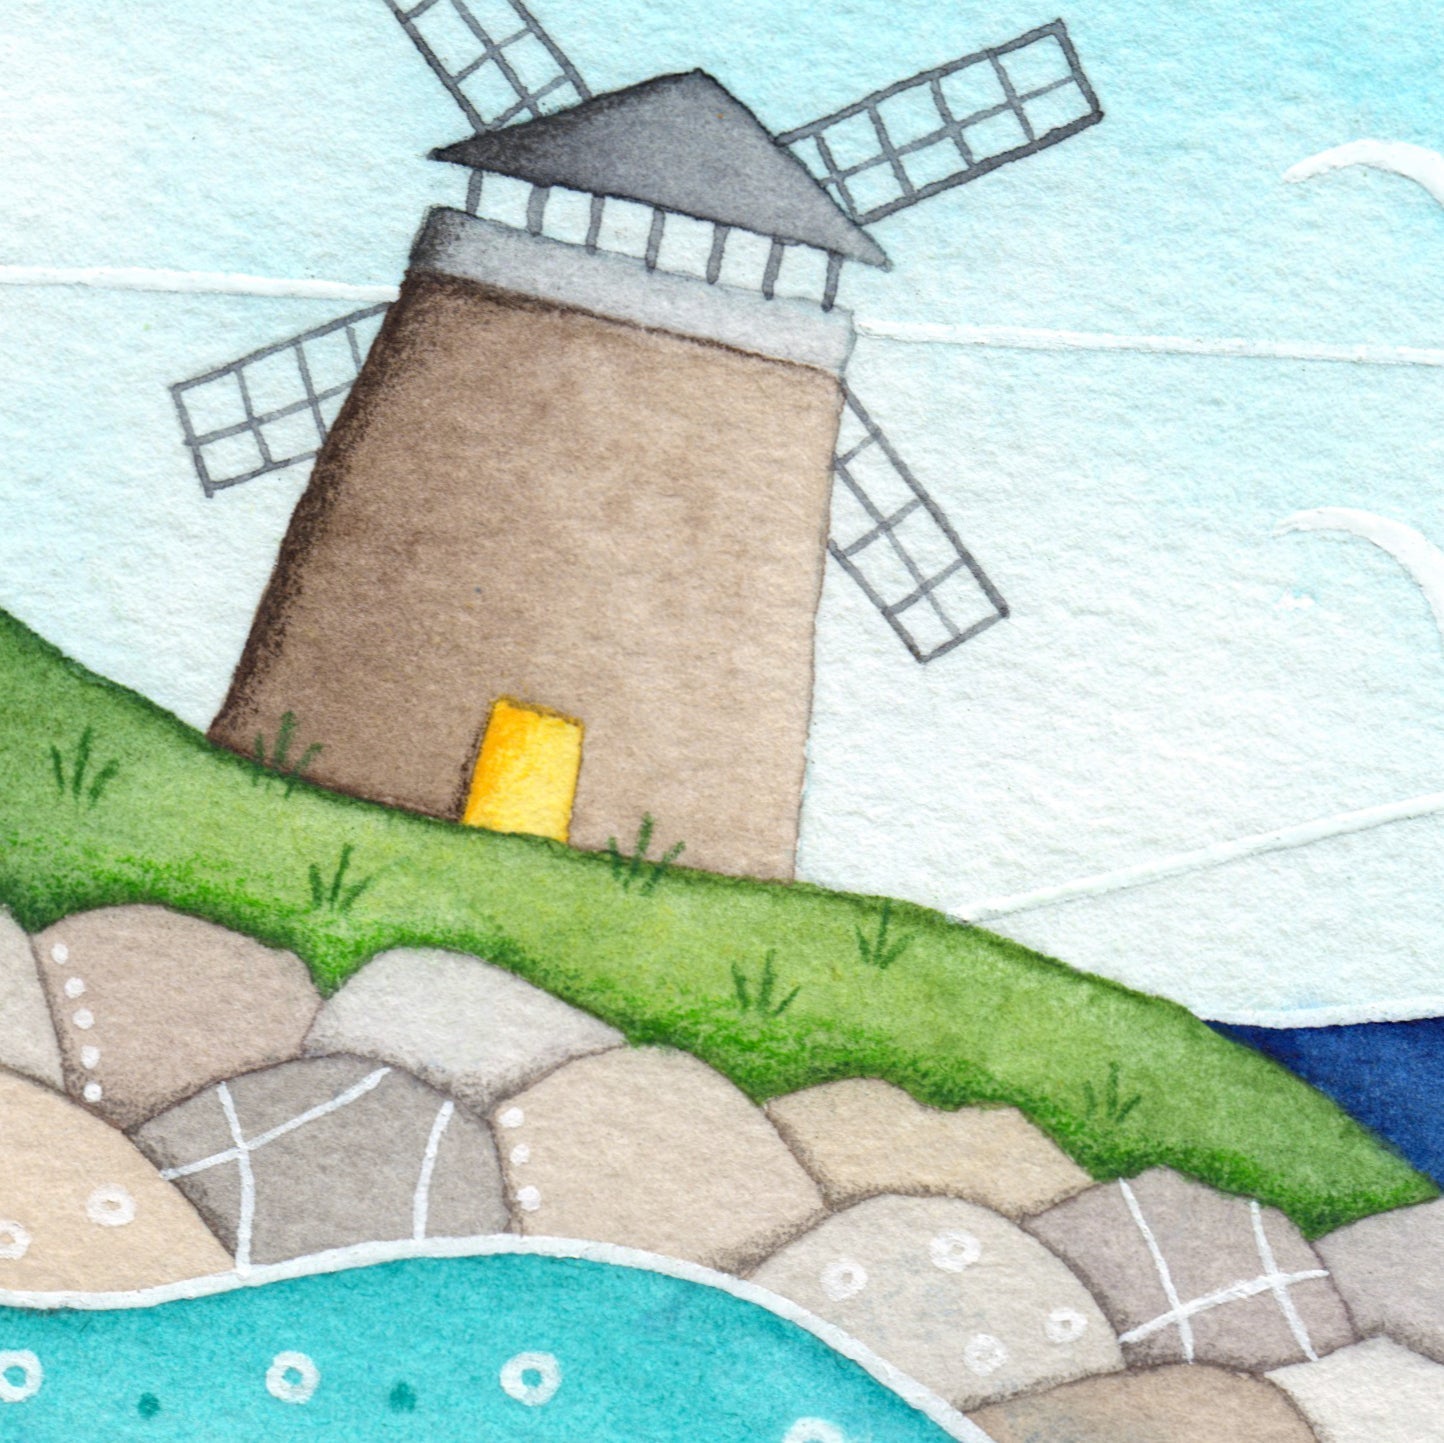 Windmill & Bathing Pool Print - St Monans Seaside Watercolour Painting - Limited Edition Signed Art - East Neuk Beach Crafts